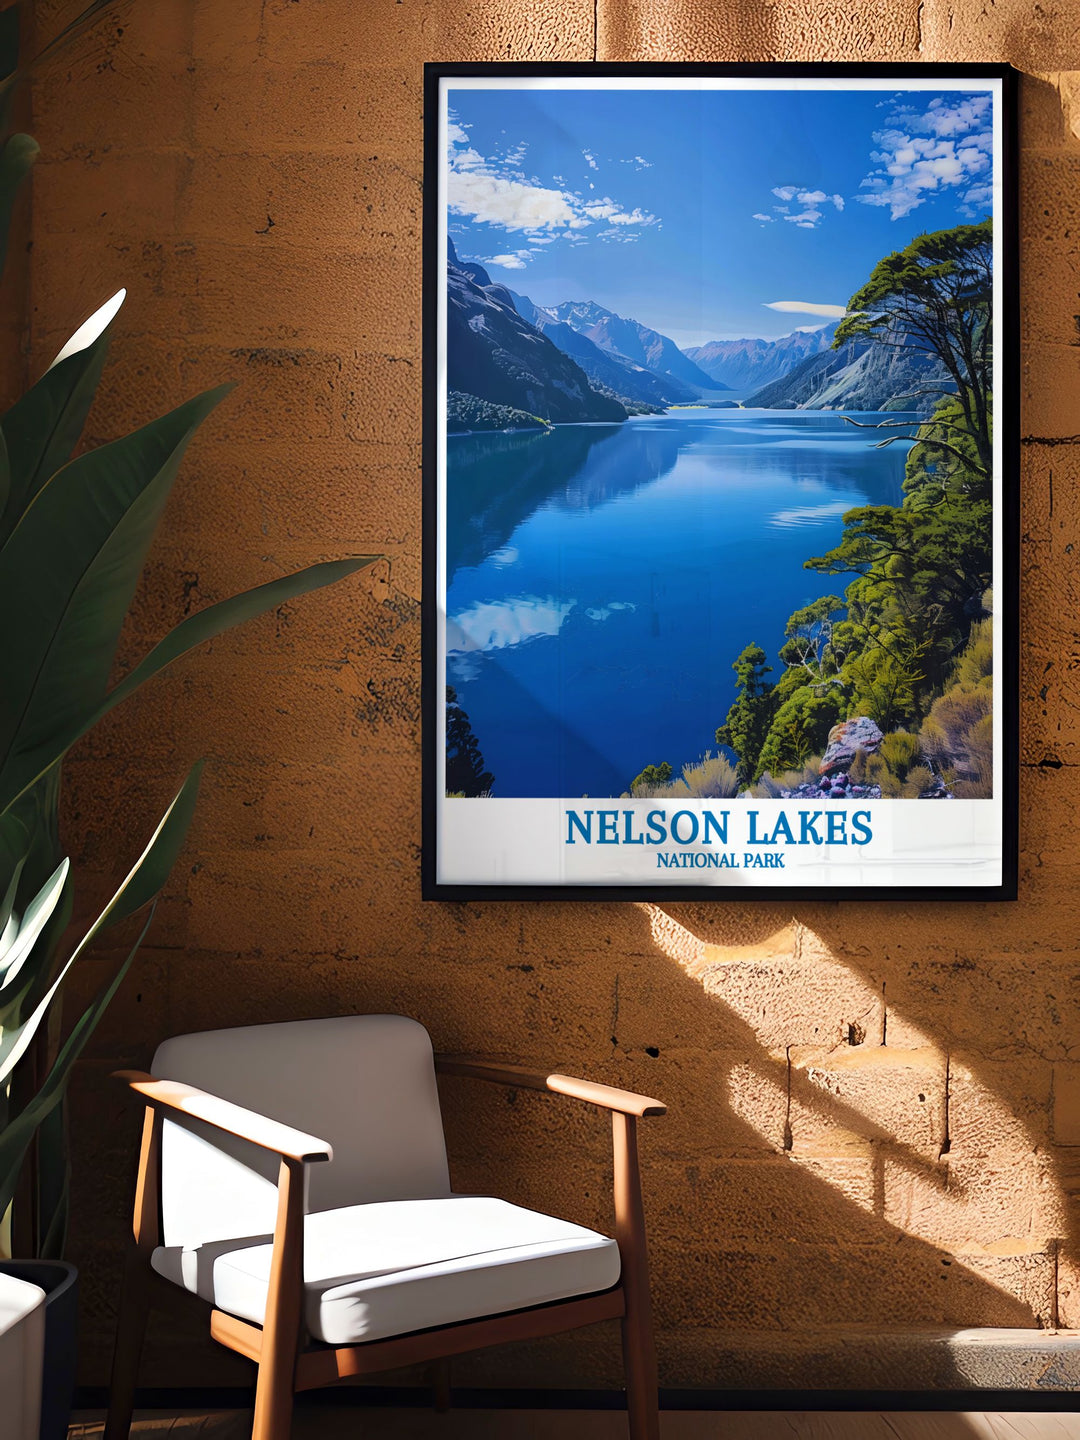 Stunning Nelson Lakes National Park home decor piece featuring a vintage print of the parks serene landscapes, offering a timeless treasure for those who appreciate the natural beauty of New Zealand and its national parks.